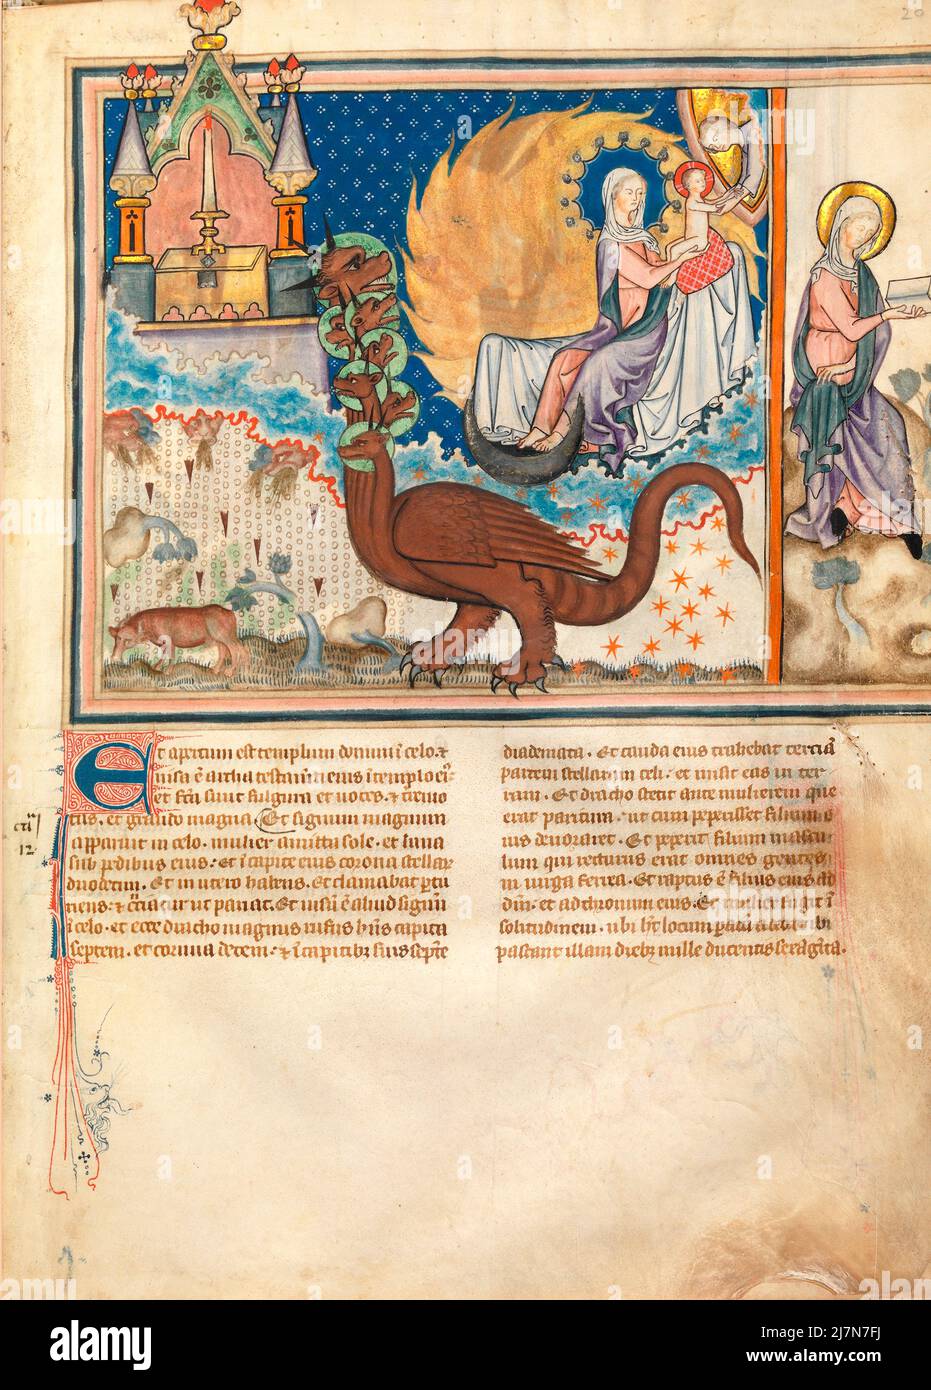 The Cloisters Apocalypse ca. 1330  - The Apocalypse, or Book of Revelation,  John the Evangelist , giovanni evangelista, during his exile on the Greek island of Patmos. In this Image-War in Heaven Stock Photo